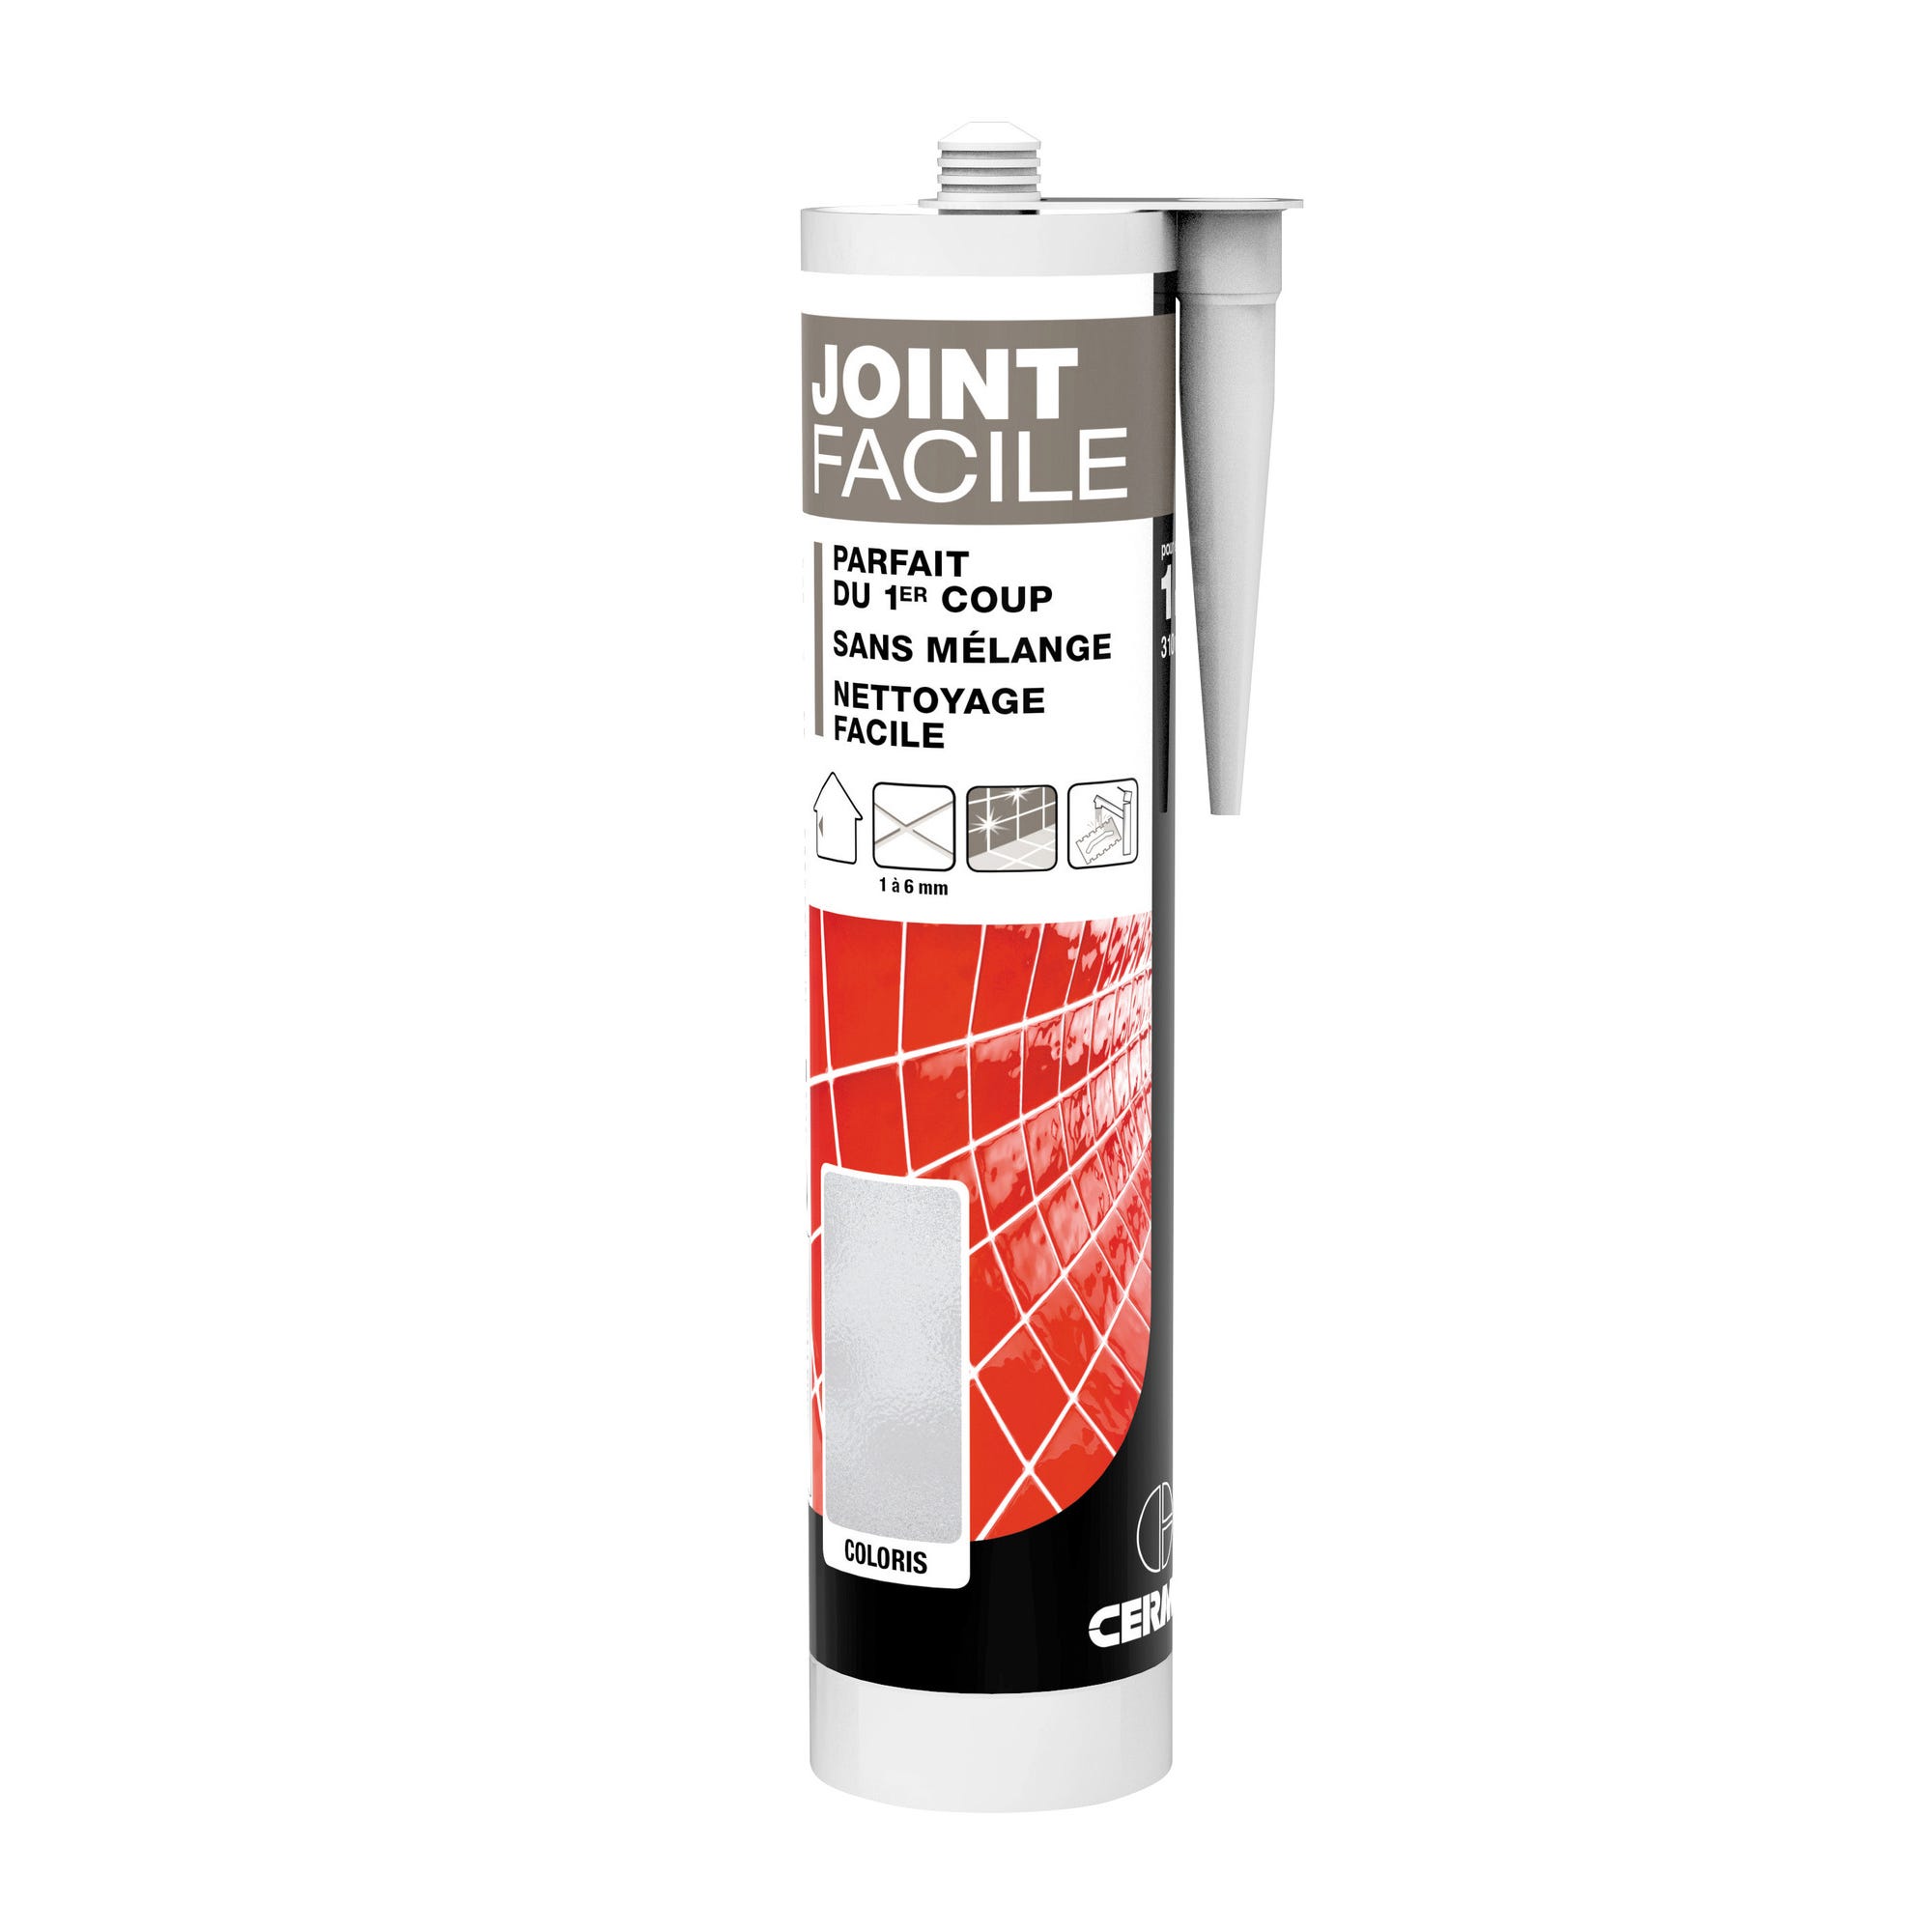 Joint facile ultra blanc 310 ml - CERMIX 0